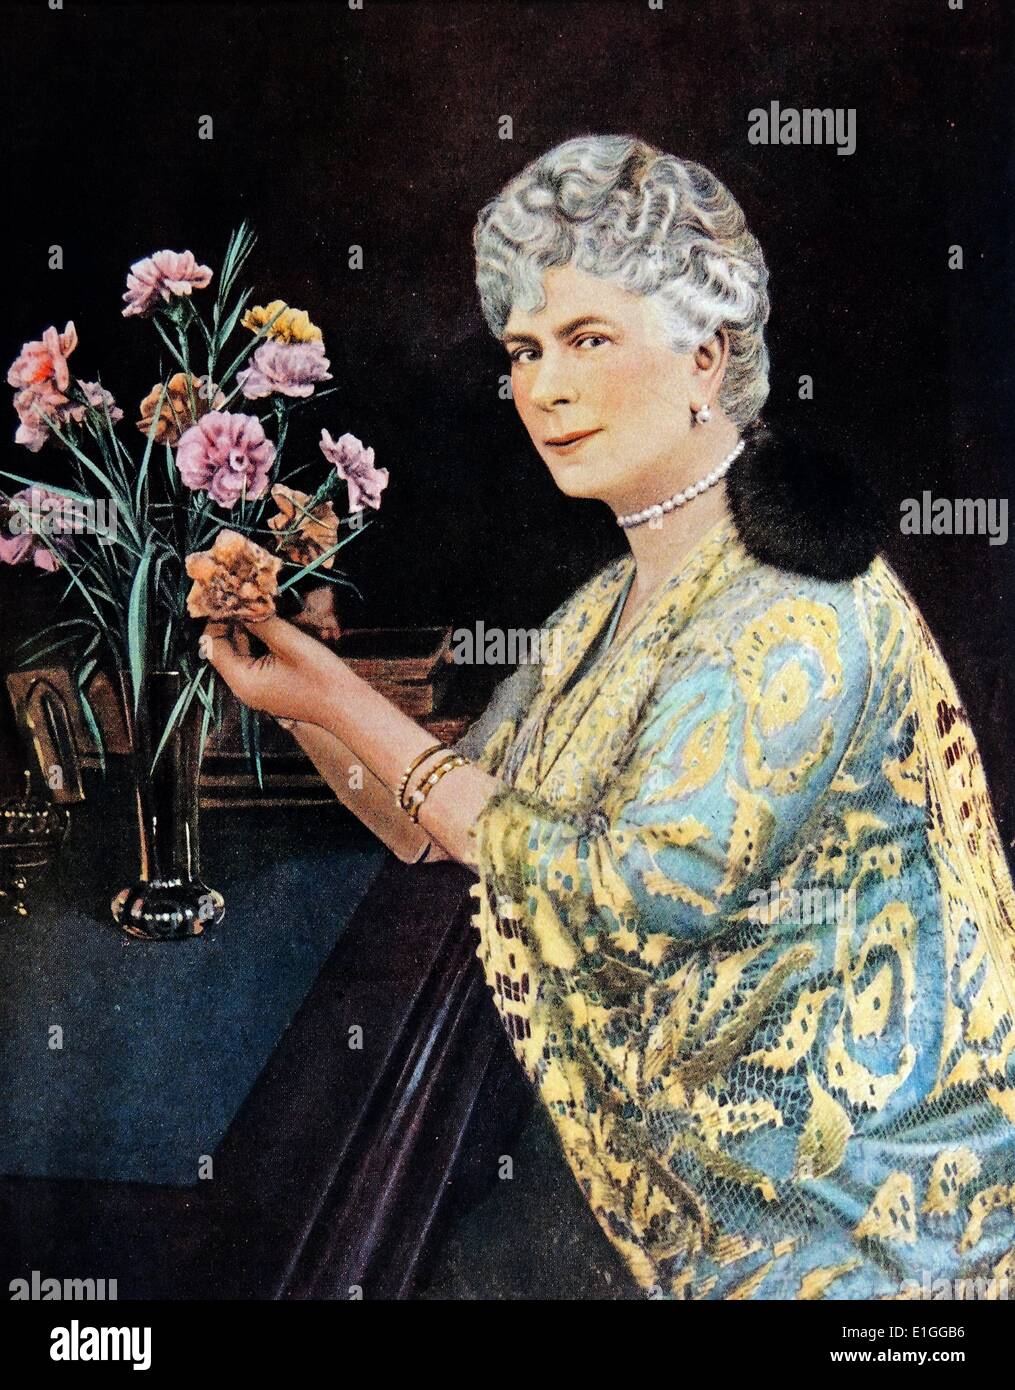 Painting of Mary of Teck (1867 - 1953). Mary of Teck was Queen of the United Kingdom and wife of King-Emperor George V. Dated 1923 Stock Photo